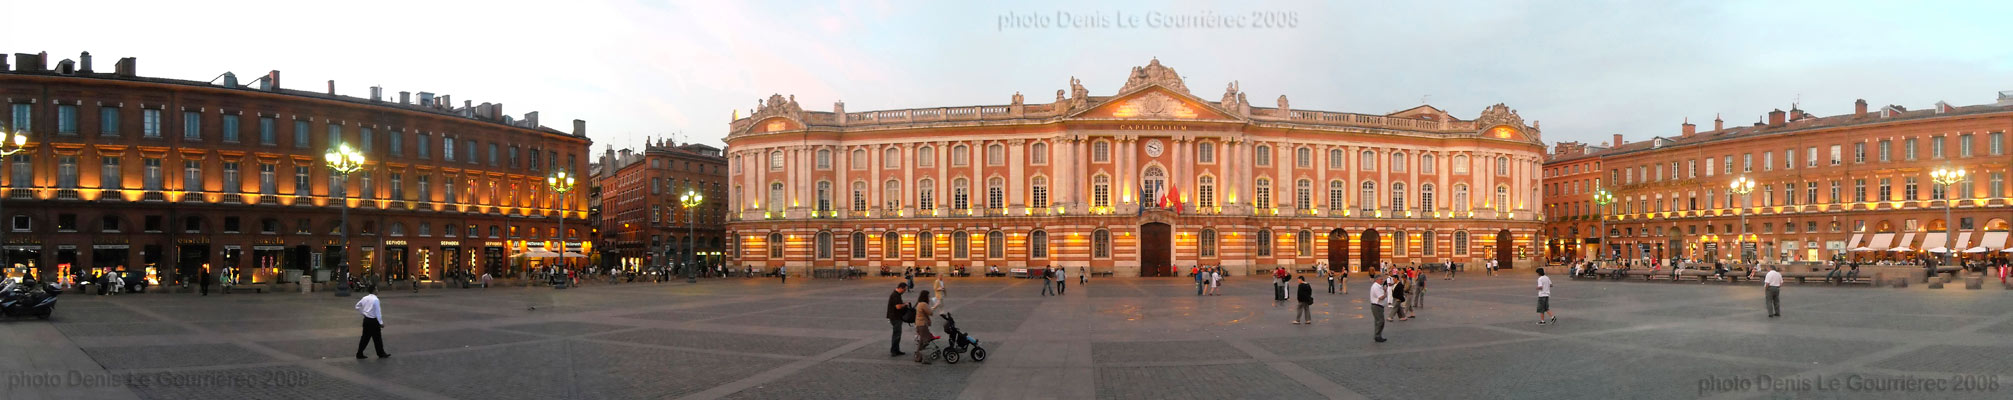 capitol toulouse